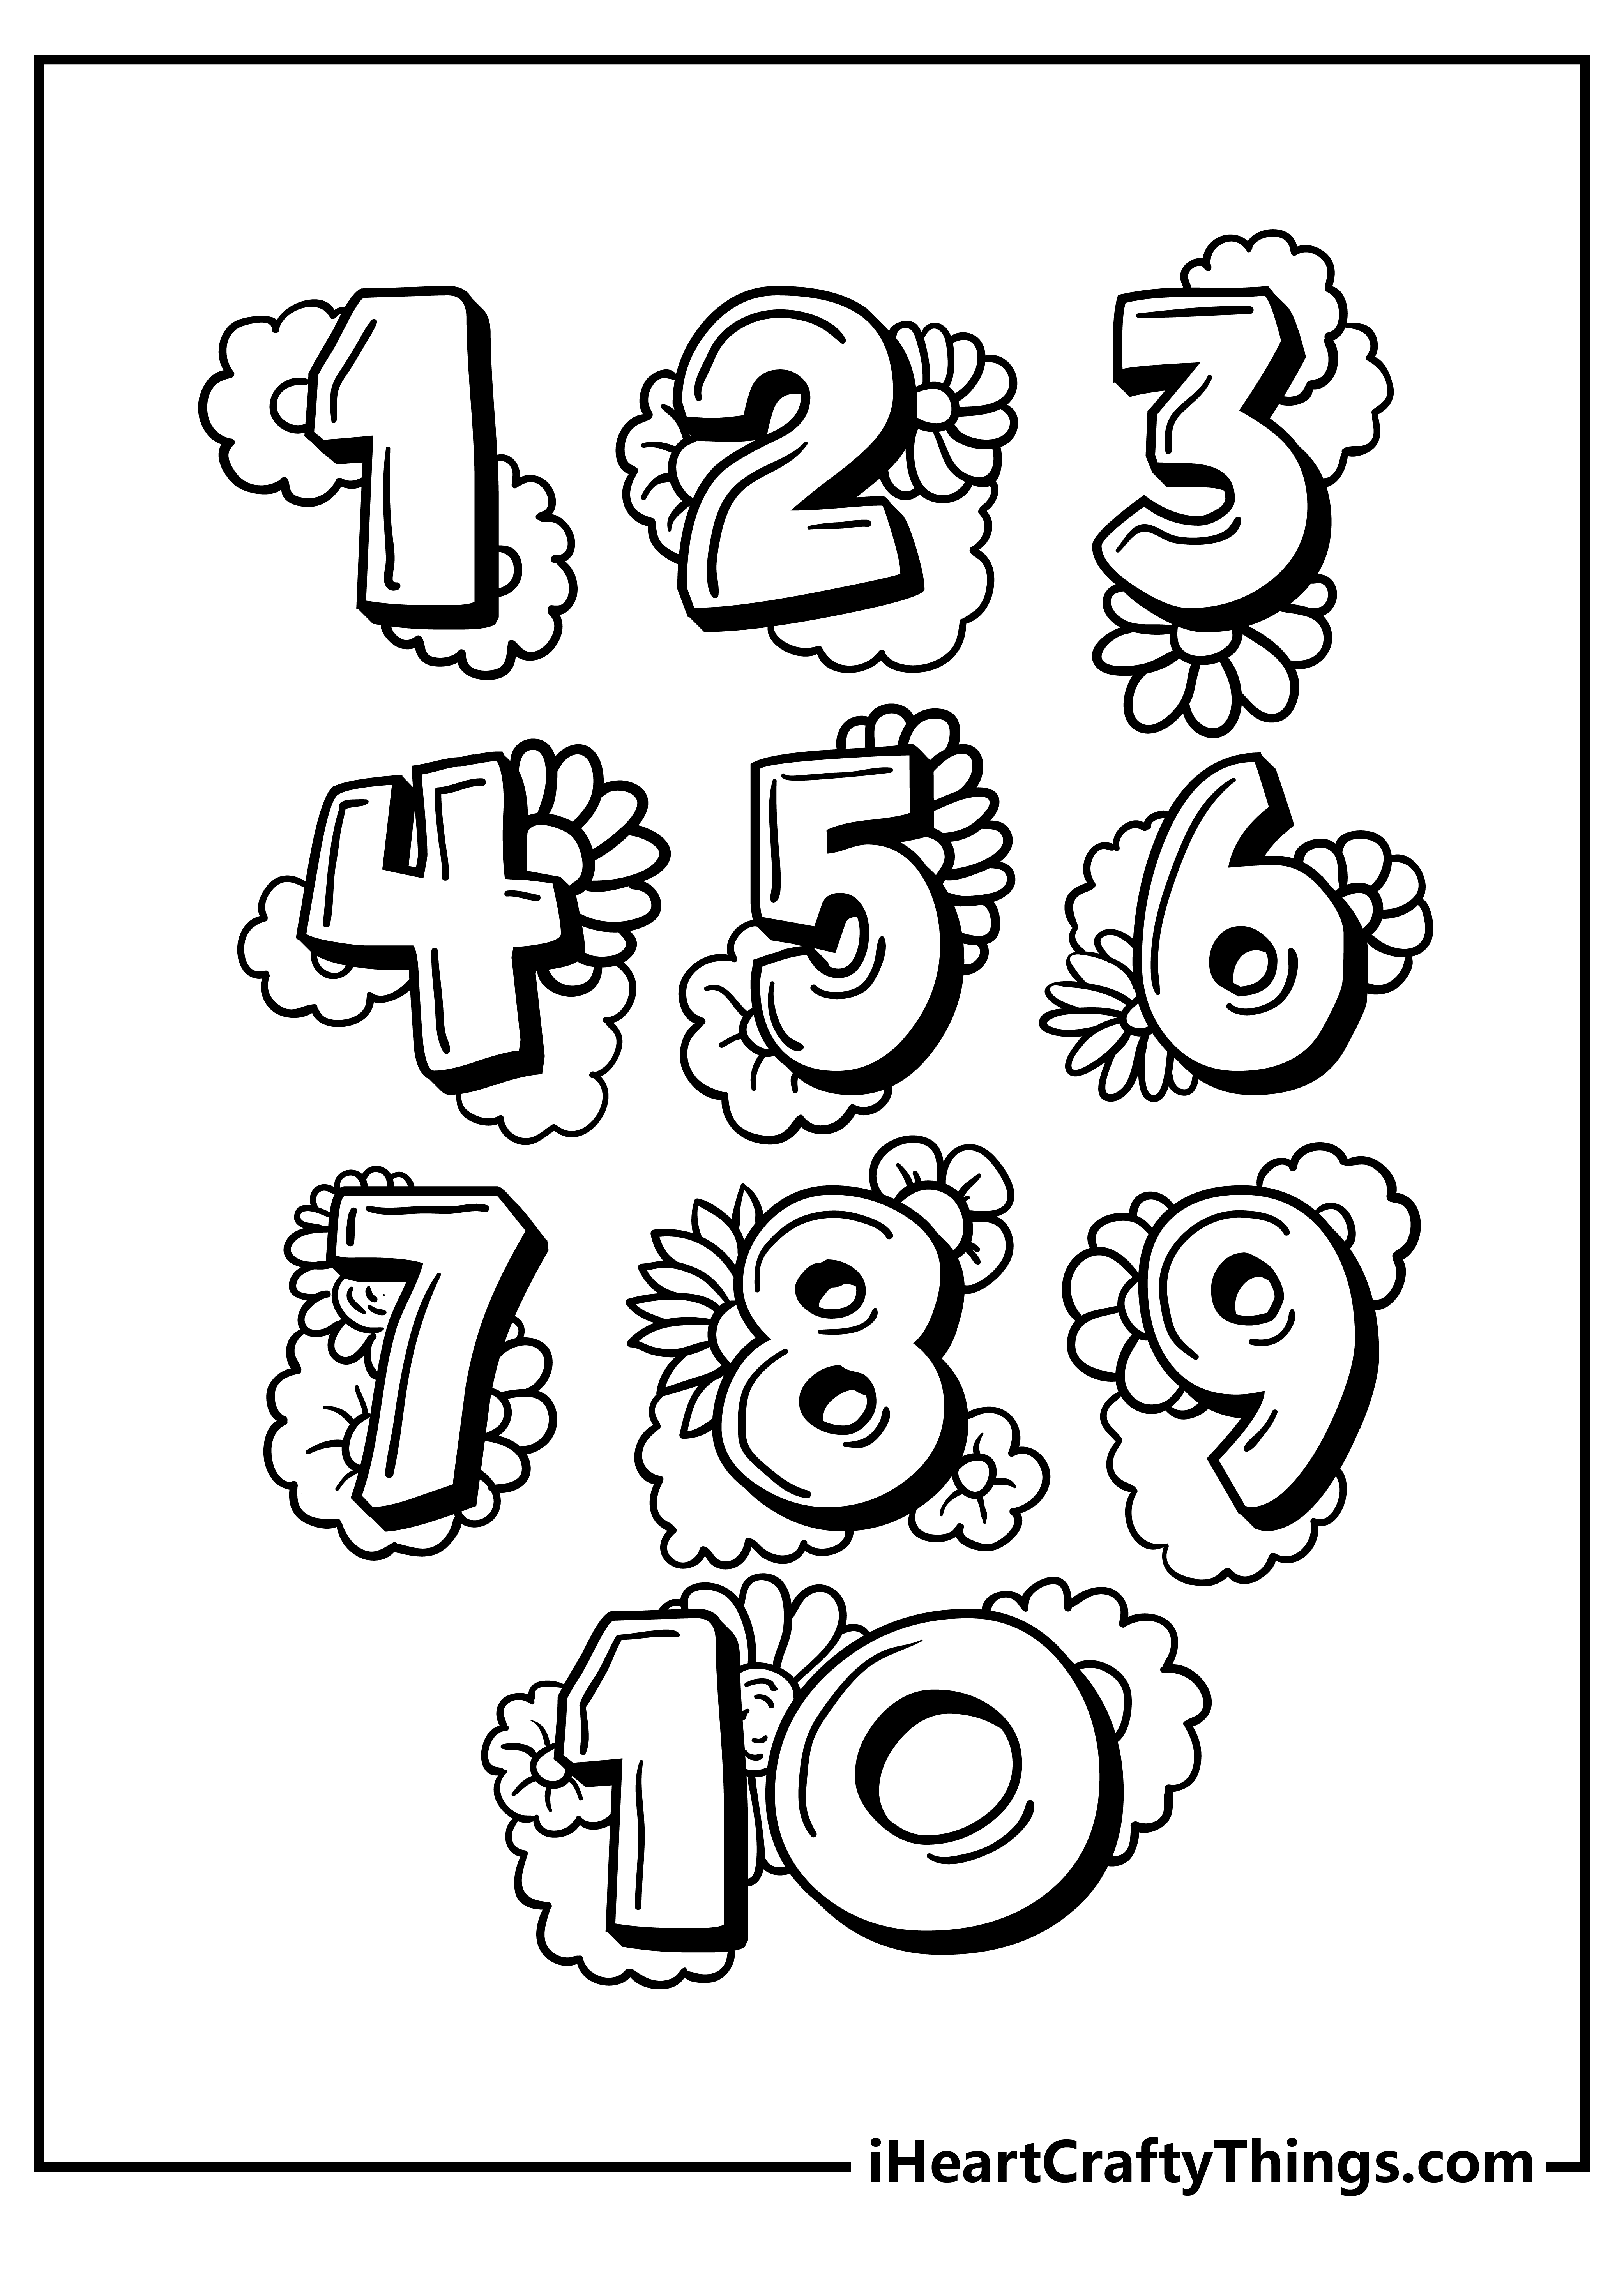 Printable Number Coloring Pages (Updated 2022)